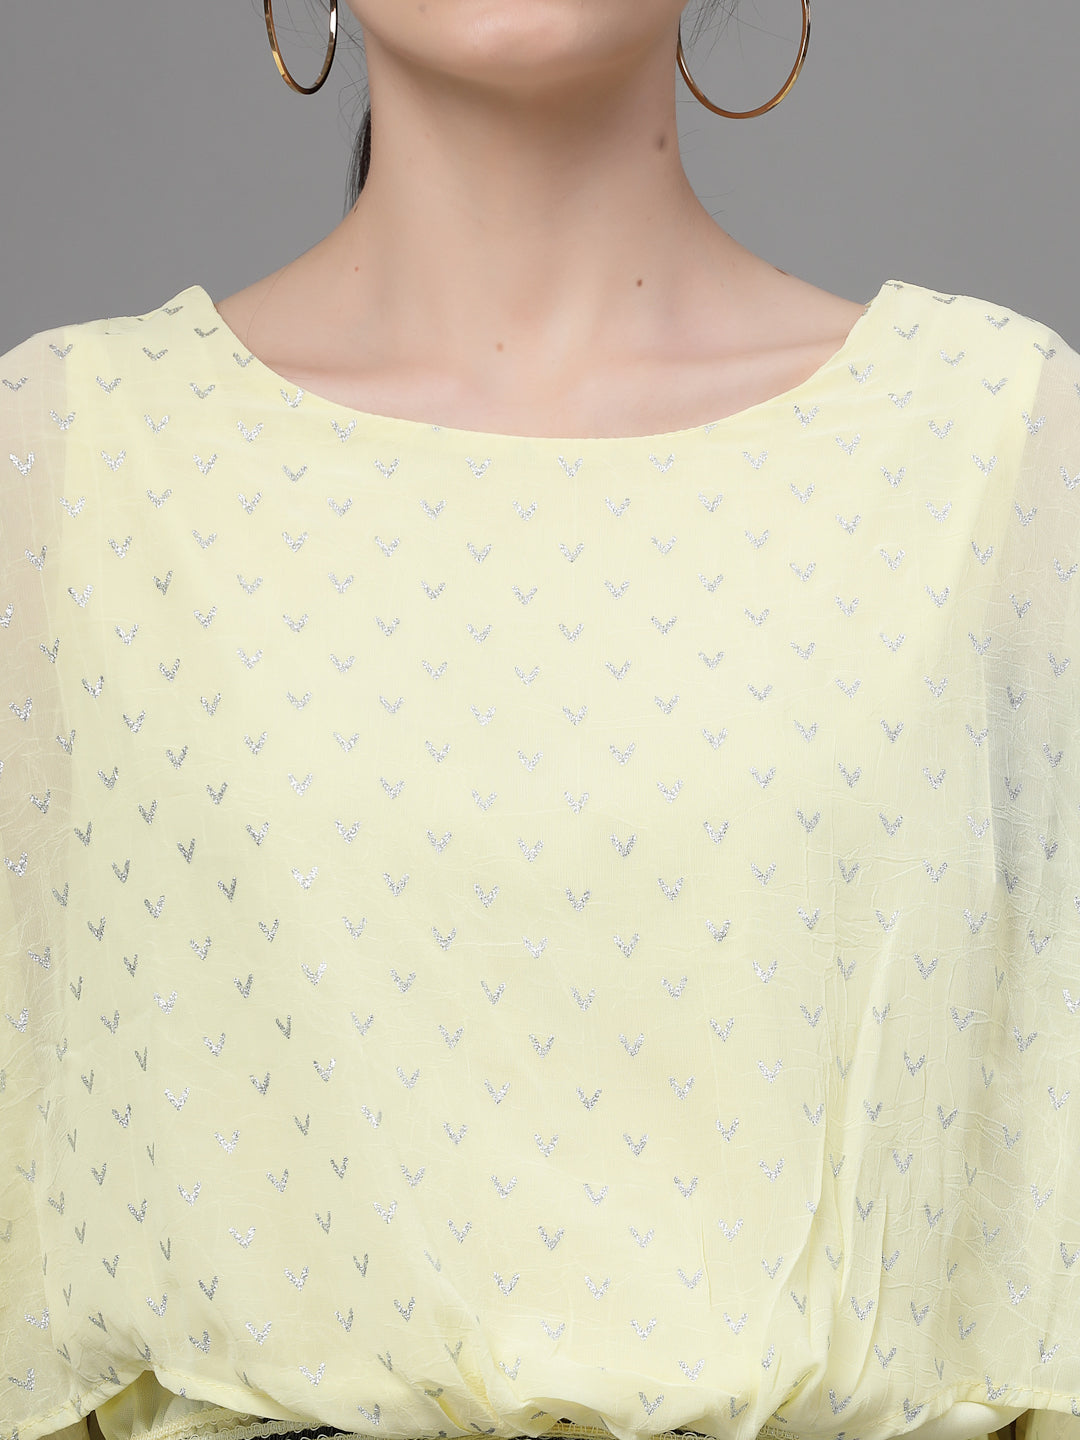 Women Flared Yellow Round Neck Blouse Top